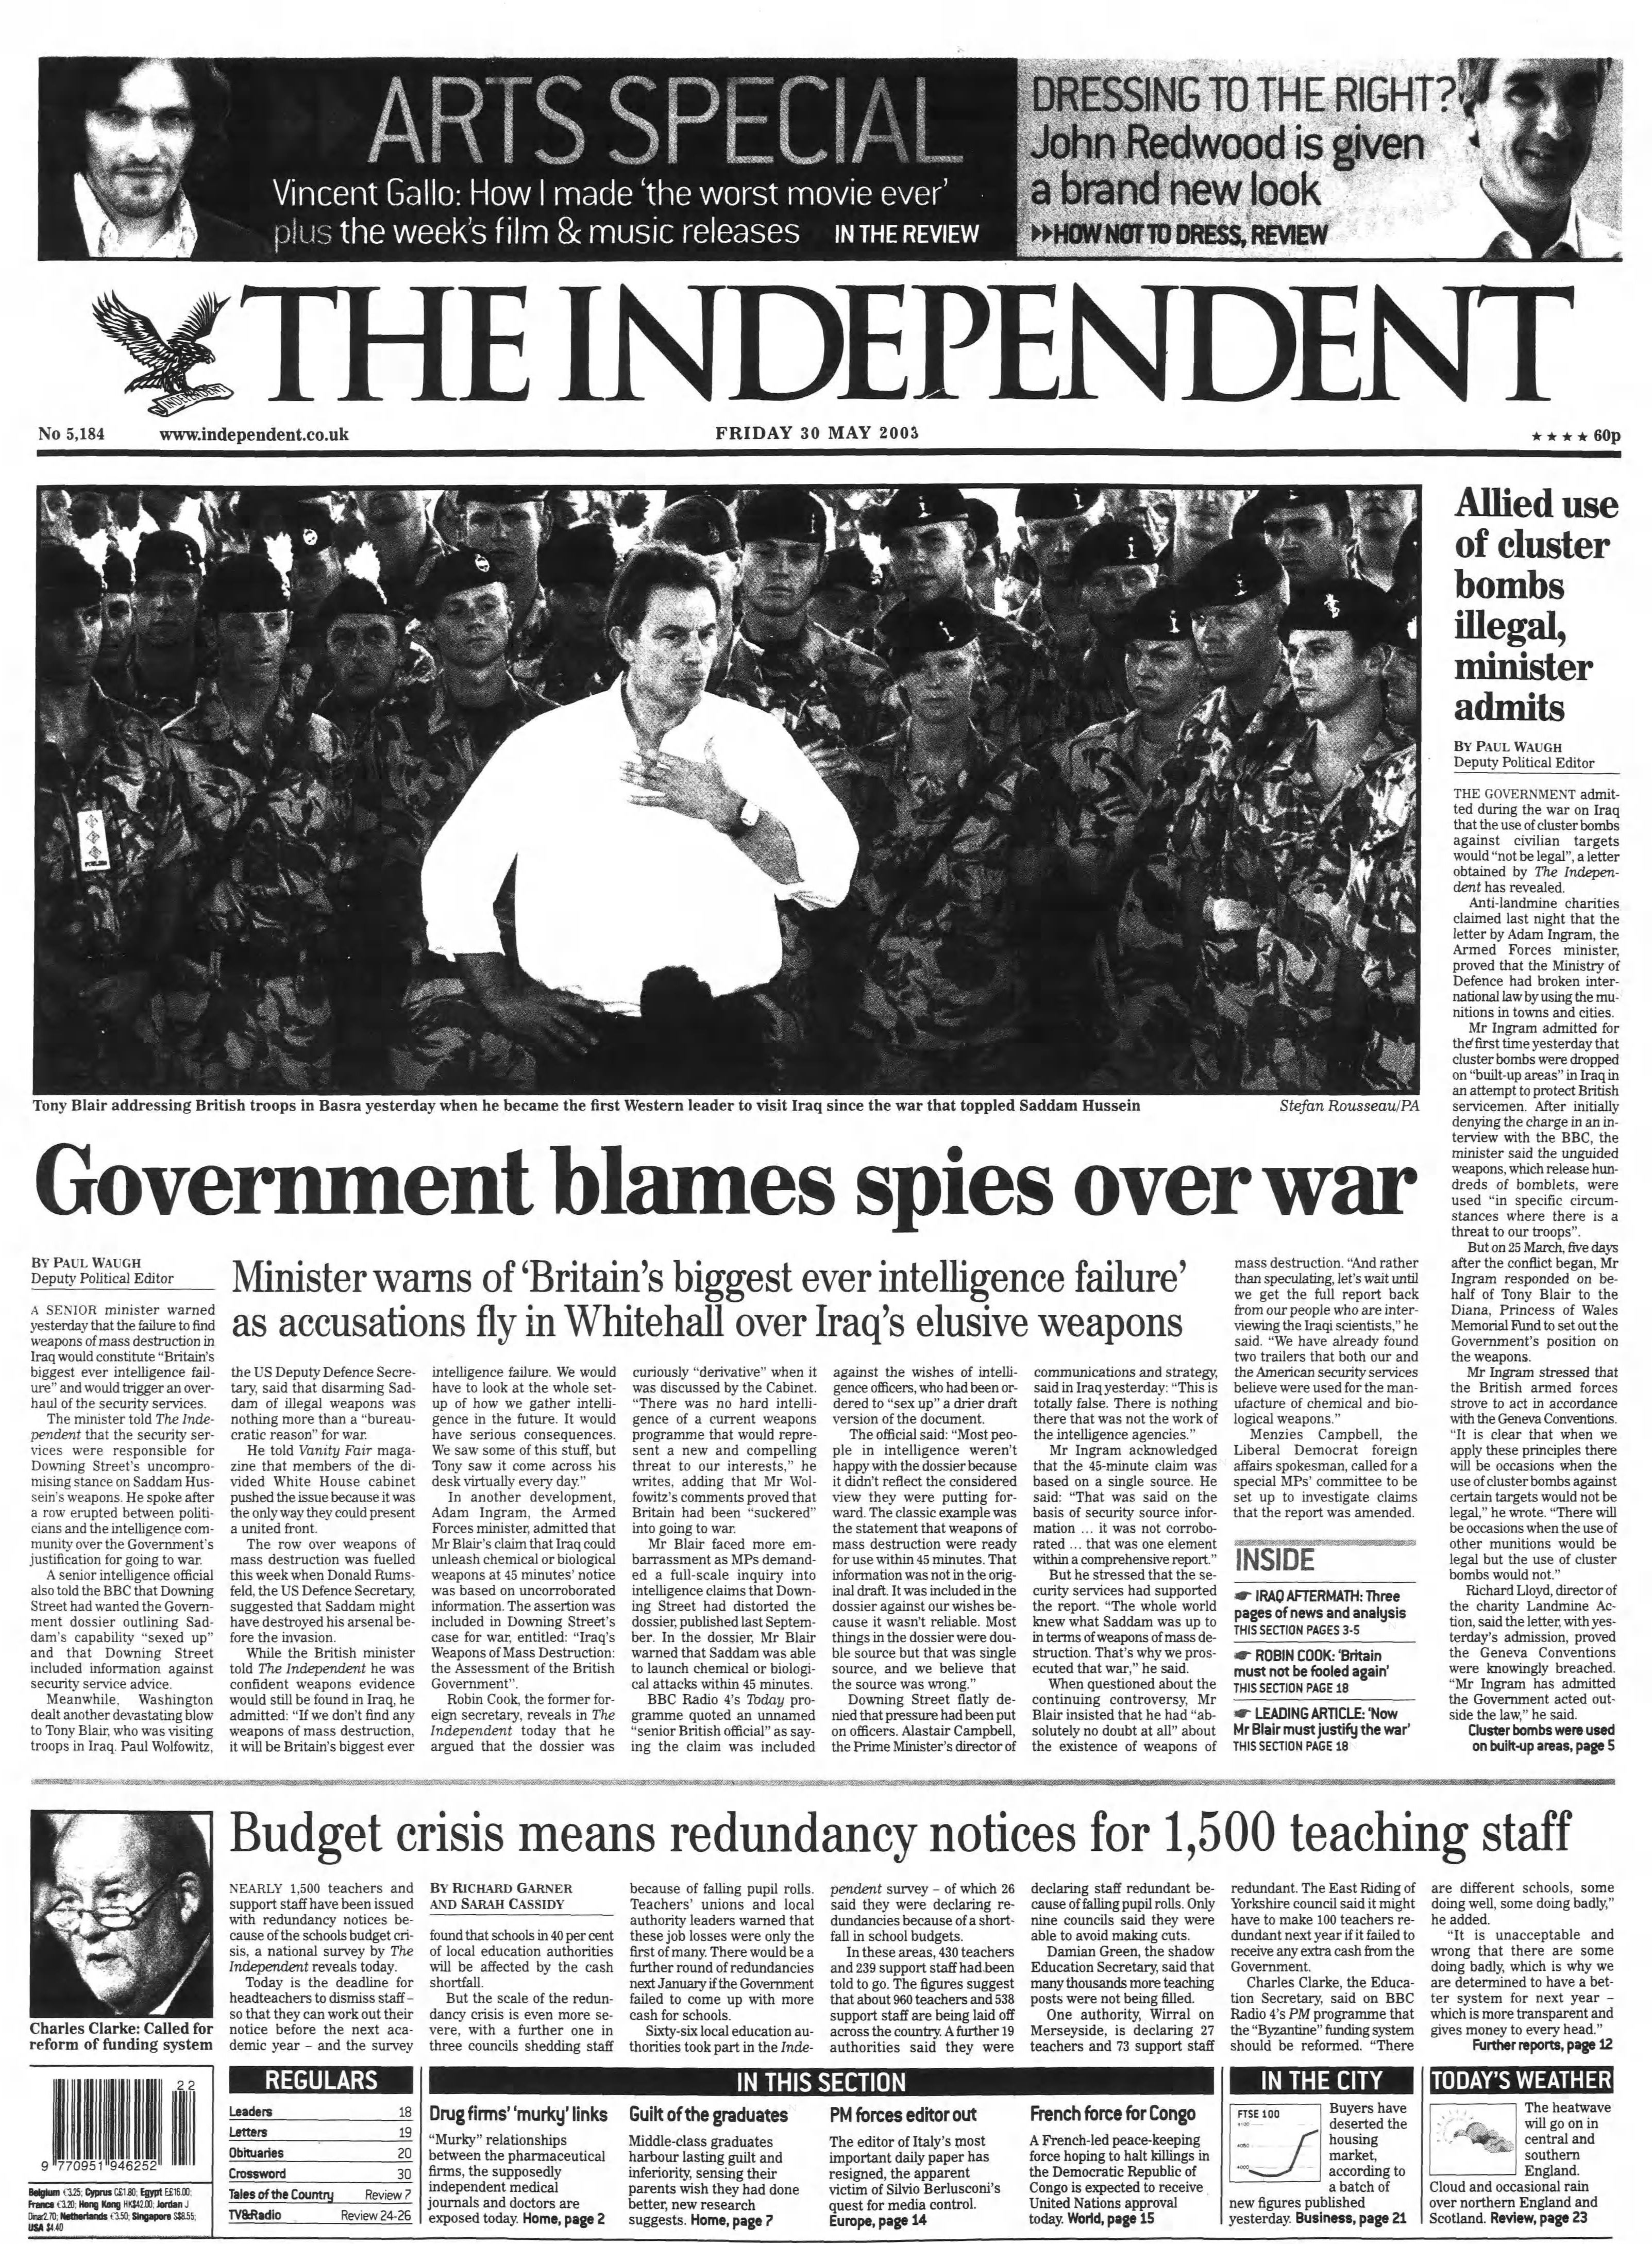 The Independent front page on 30 May 2003